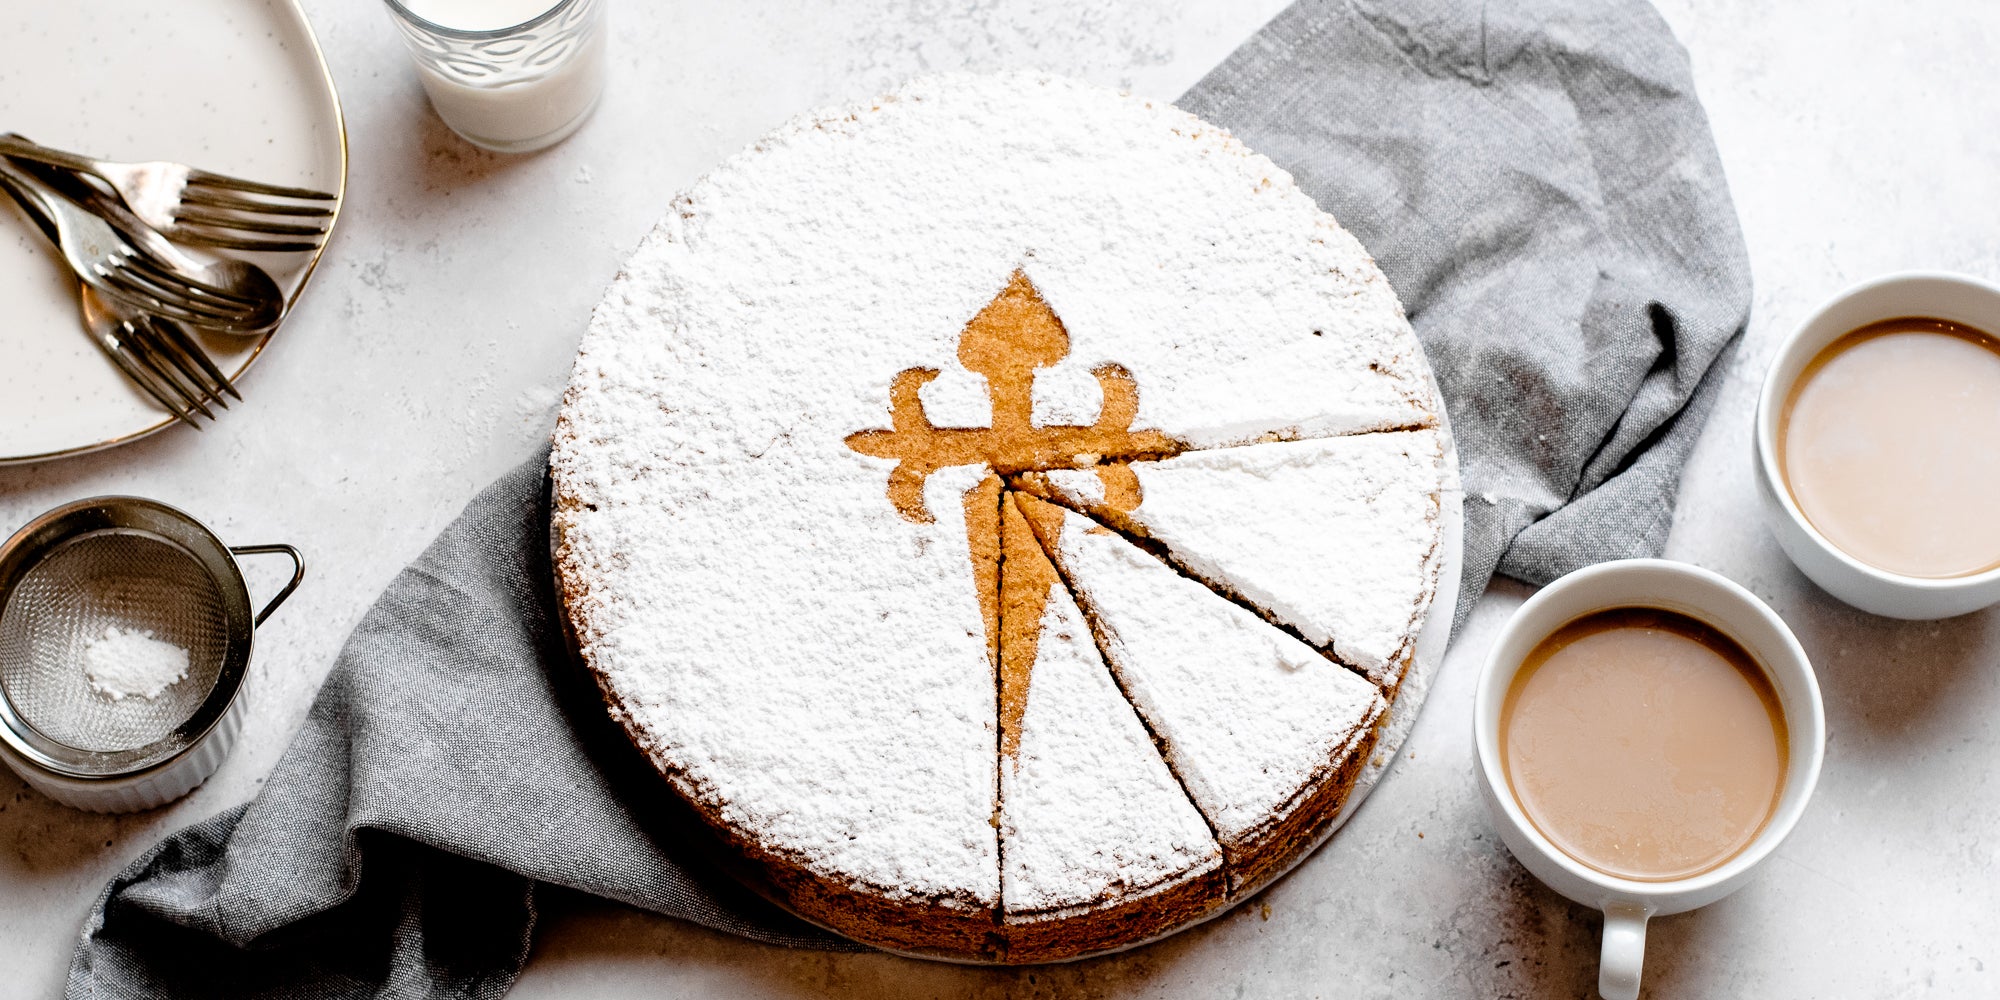 Tarta de Santiago with three slices cut out of it, served on a linen cloth, next to two cups of tea and cutlery ready to serve